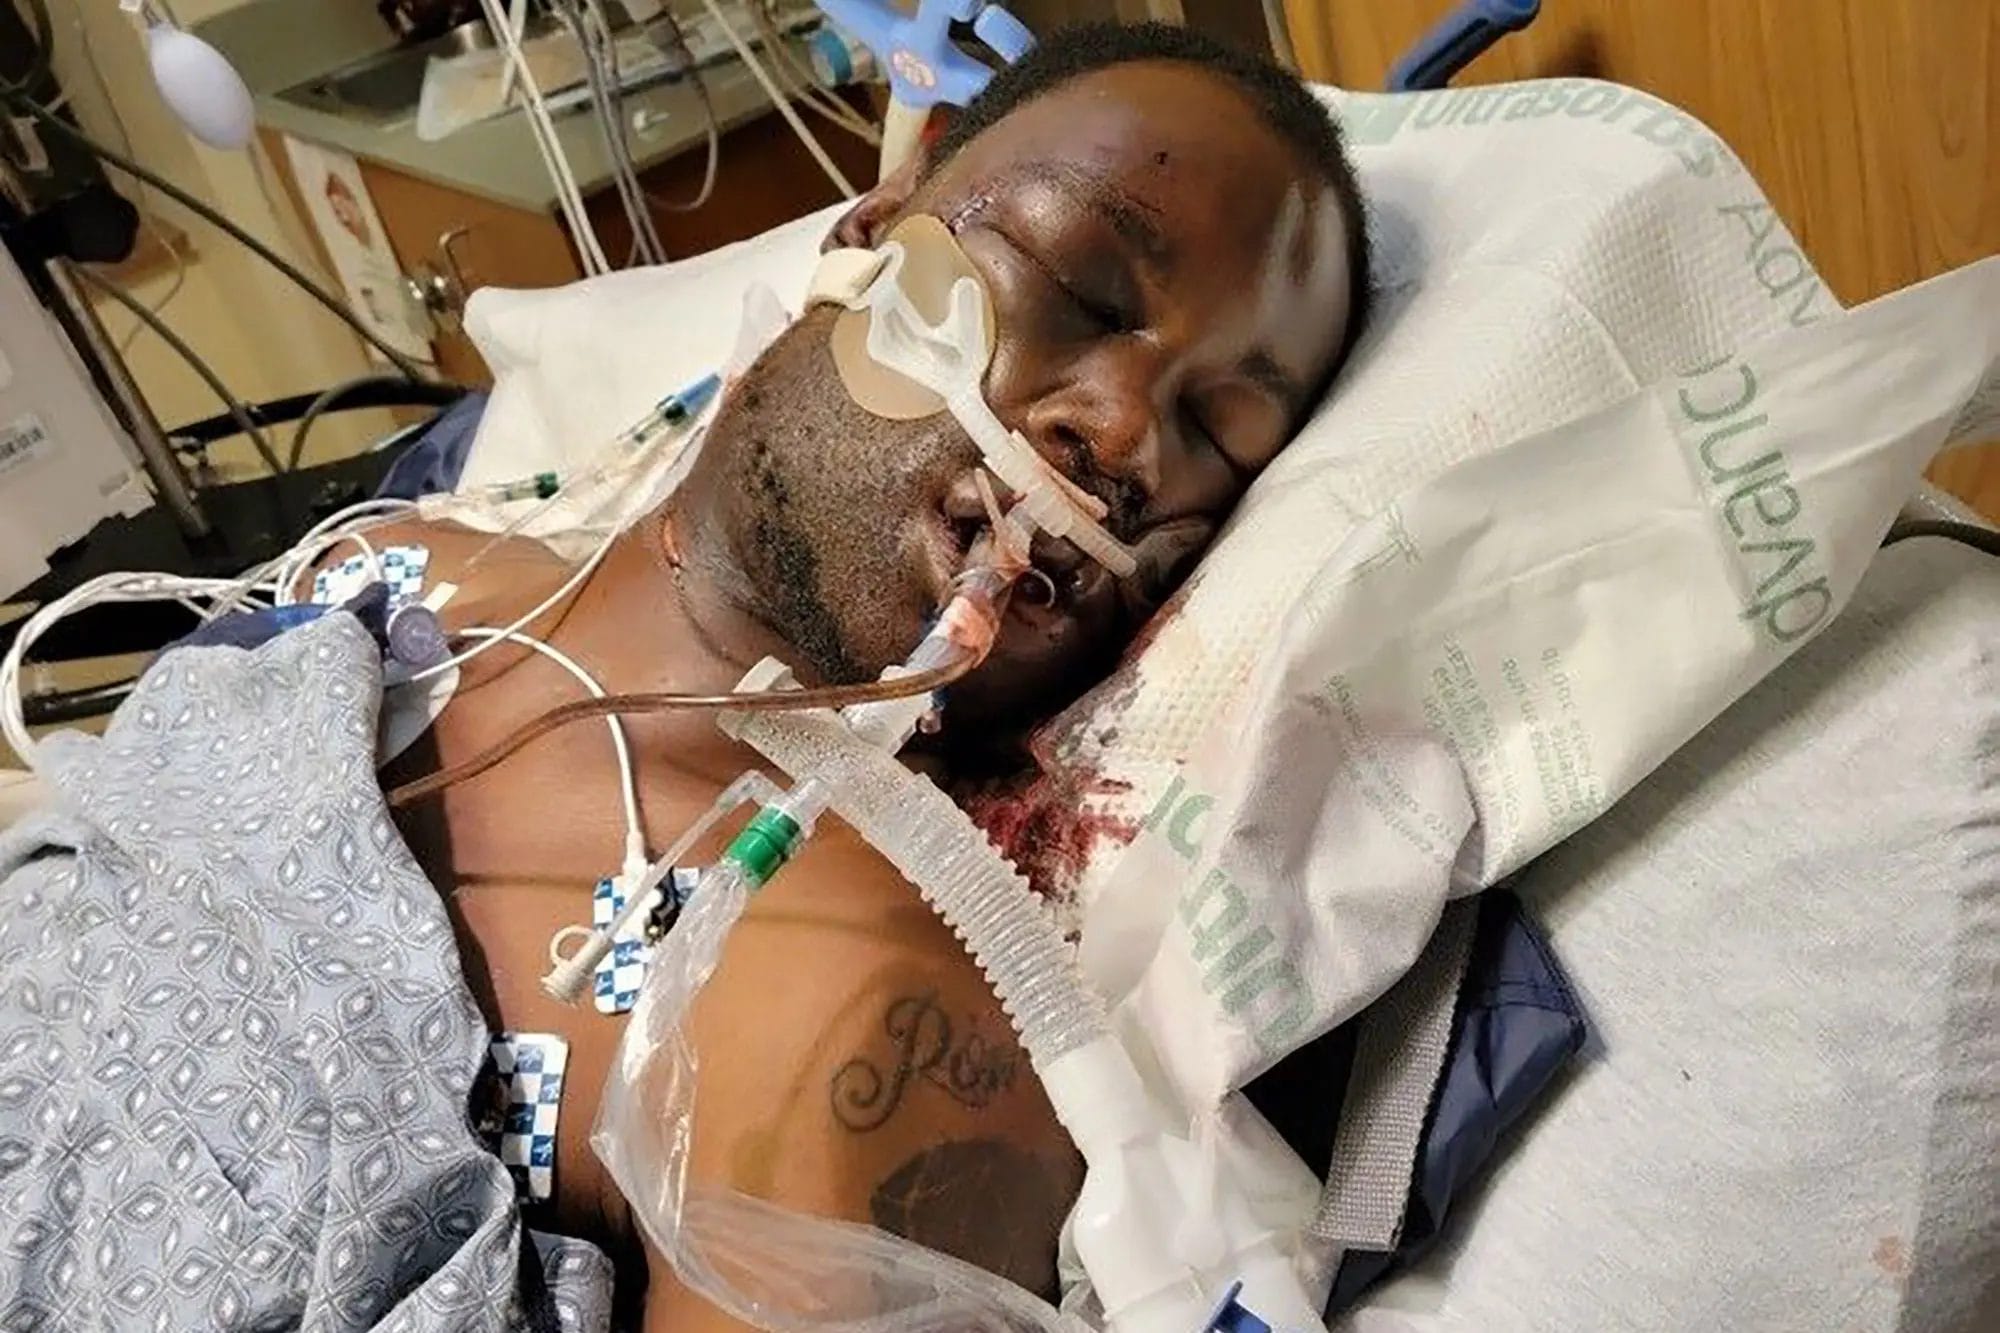 Tyre Nichols on his hospital bed